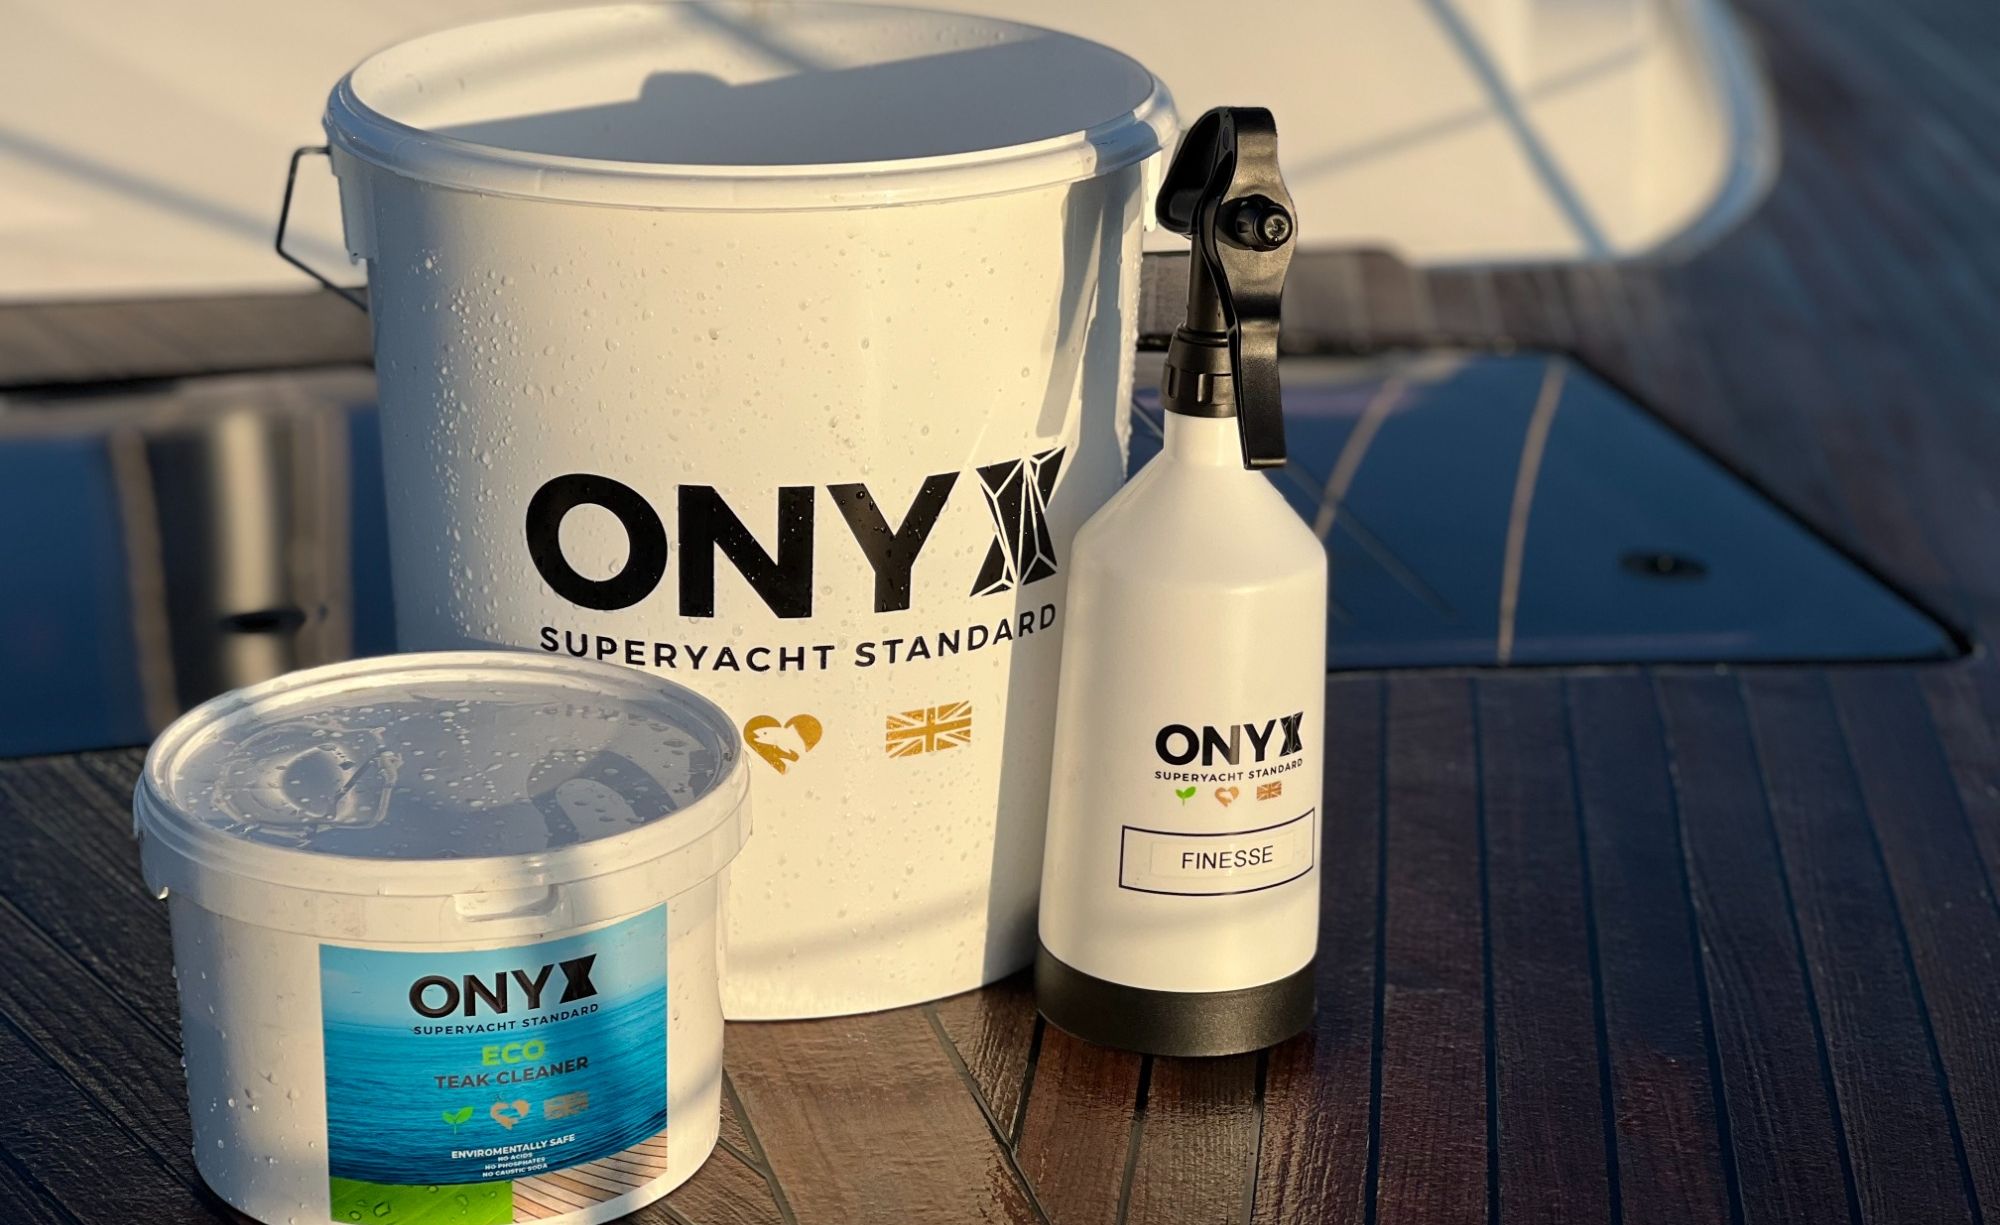 Onyx yacht and biodigradable boat wash for Teak, decks and hull wash.